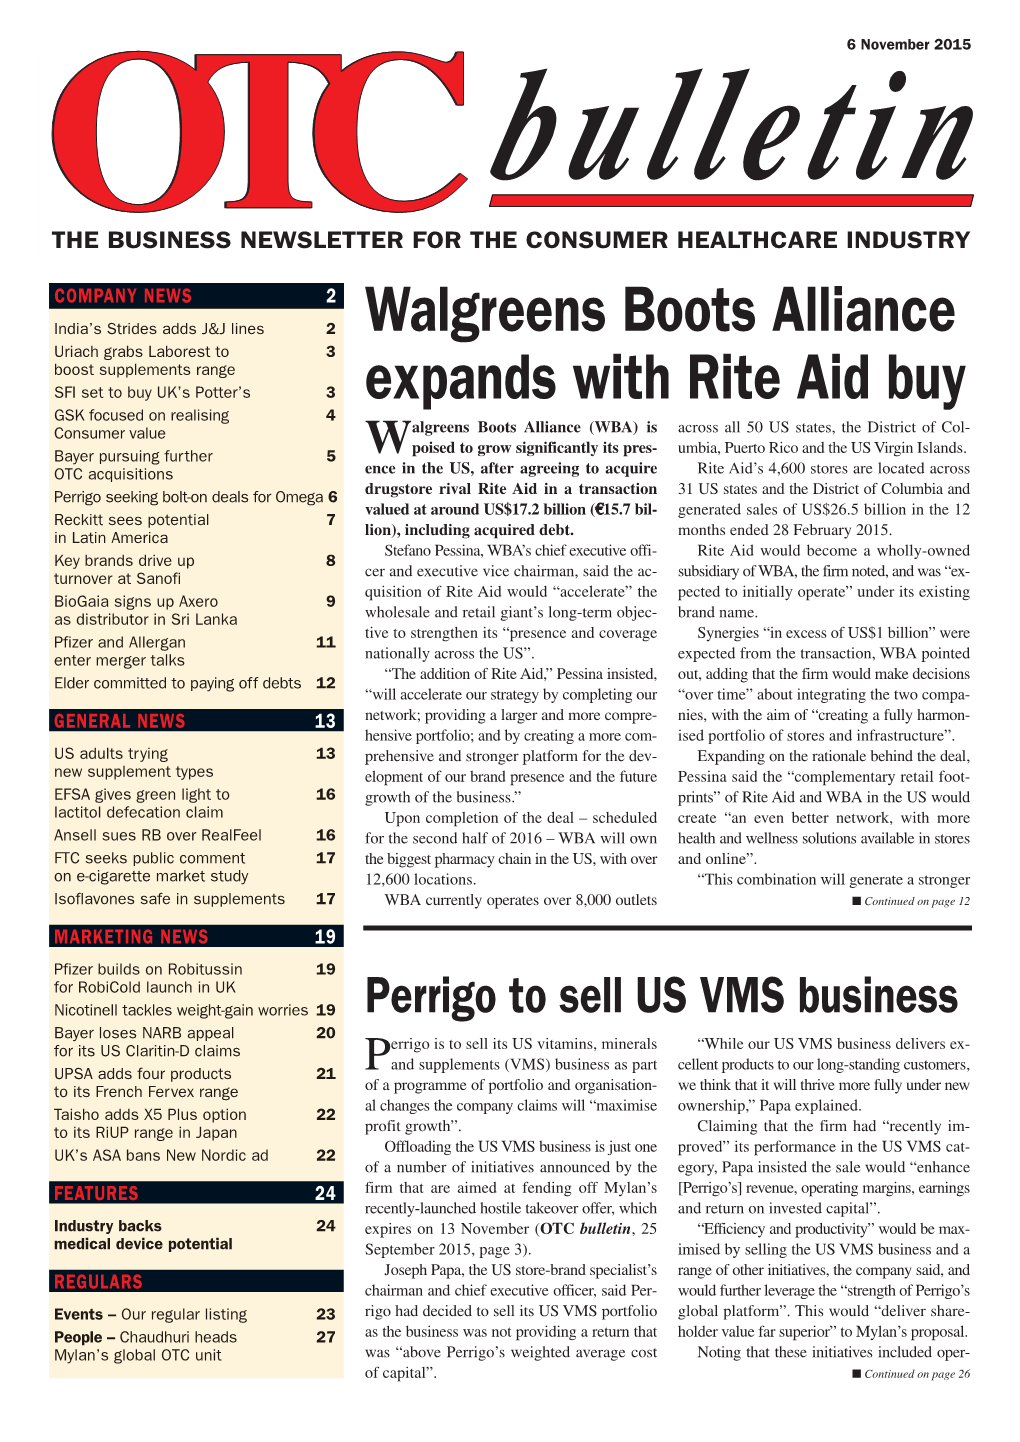 Walgreens Boots Alliance Expands with Rite Aid